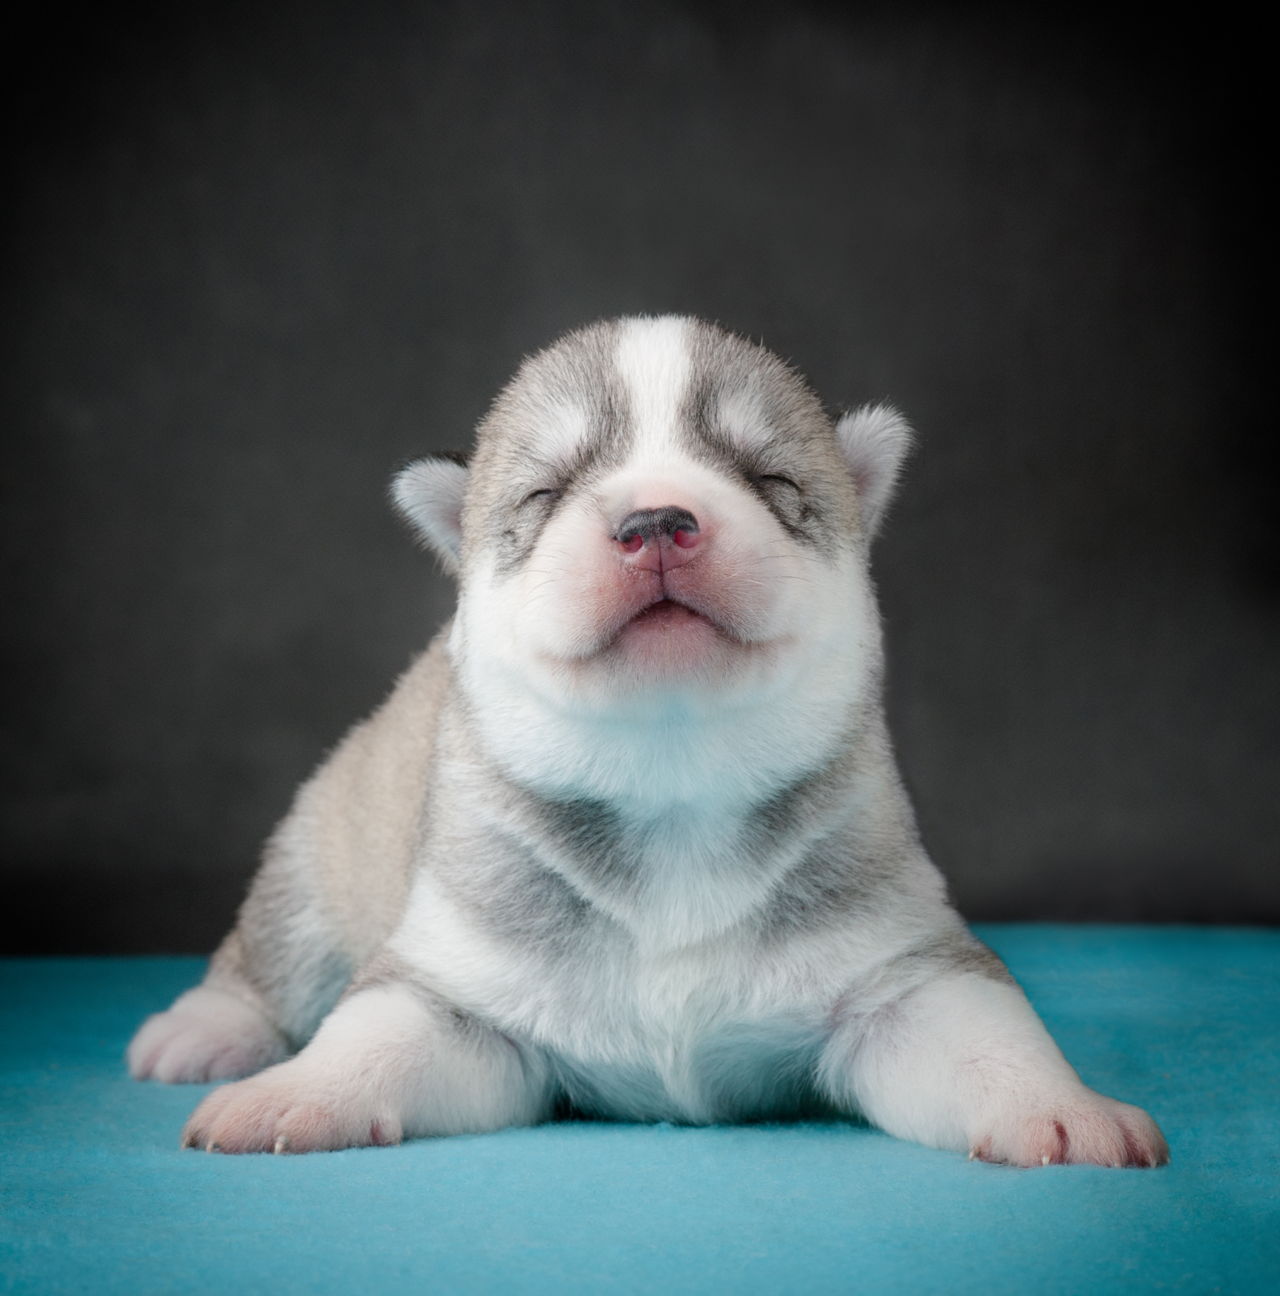 During Which Stage of Growth Do Puppies Open Their Eyes?